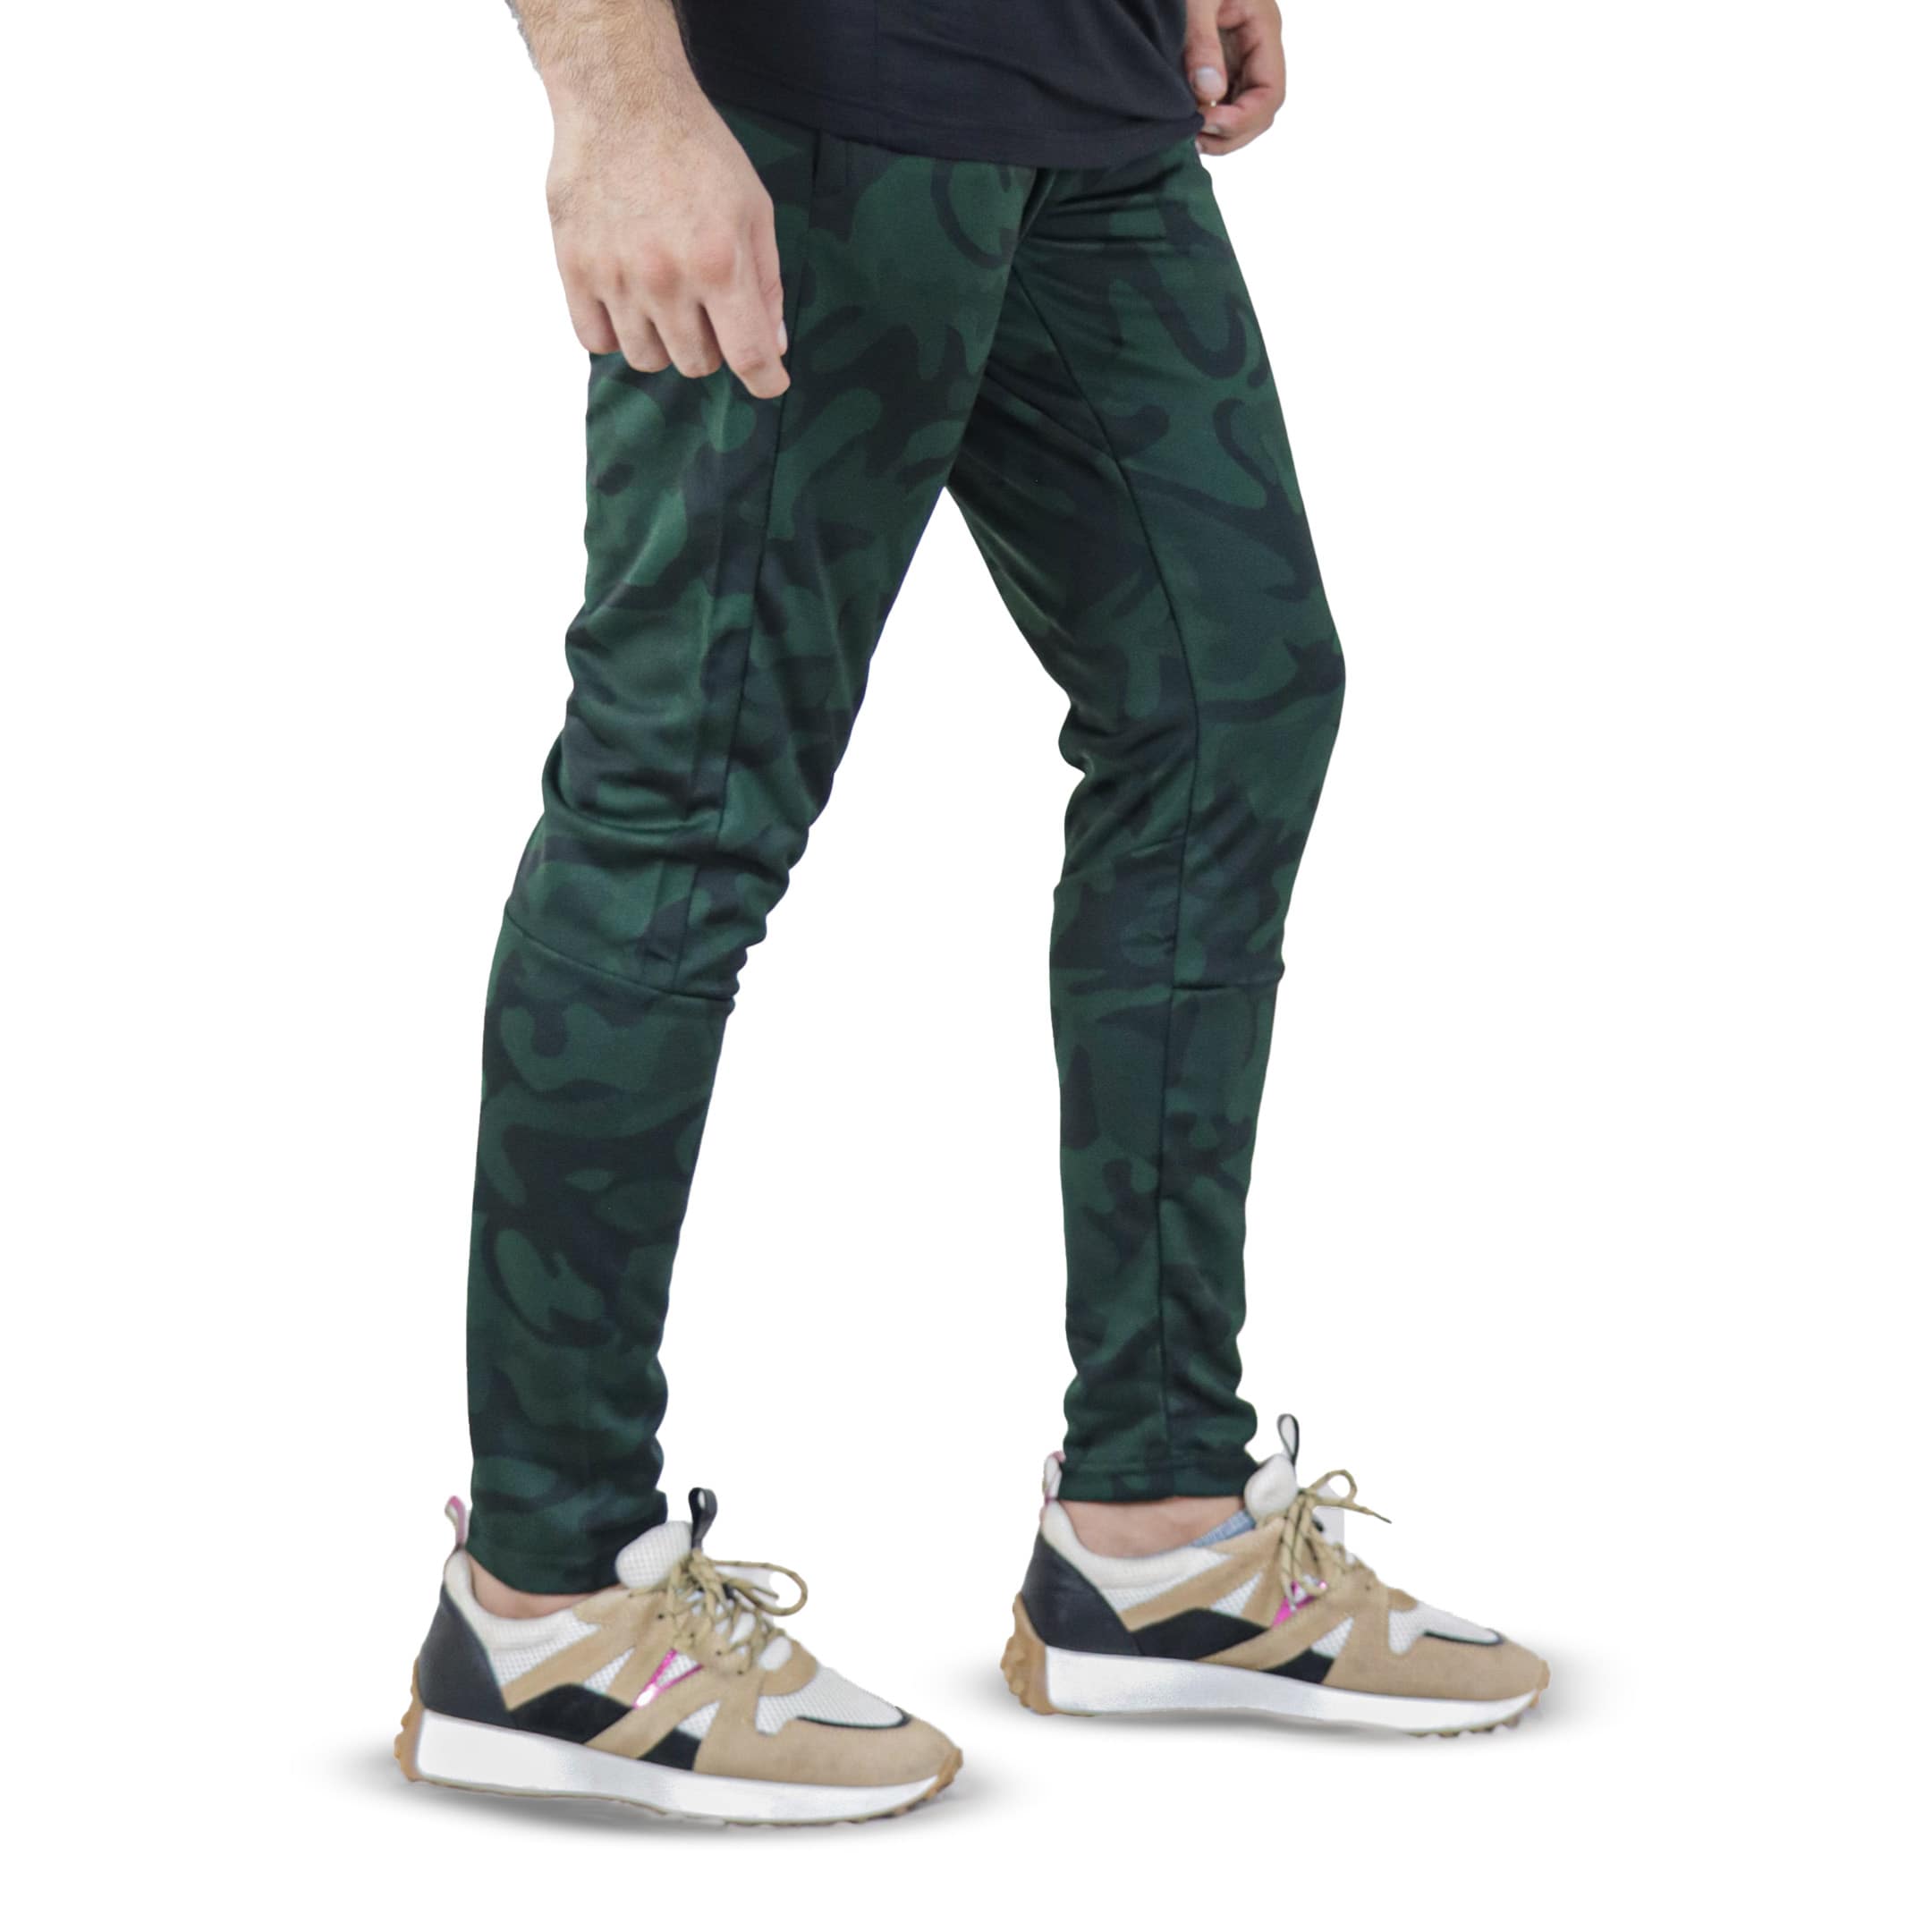 Commando Trouser in Green Color Export Quality.